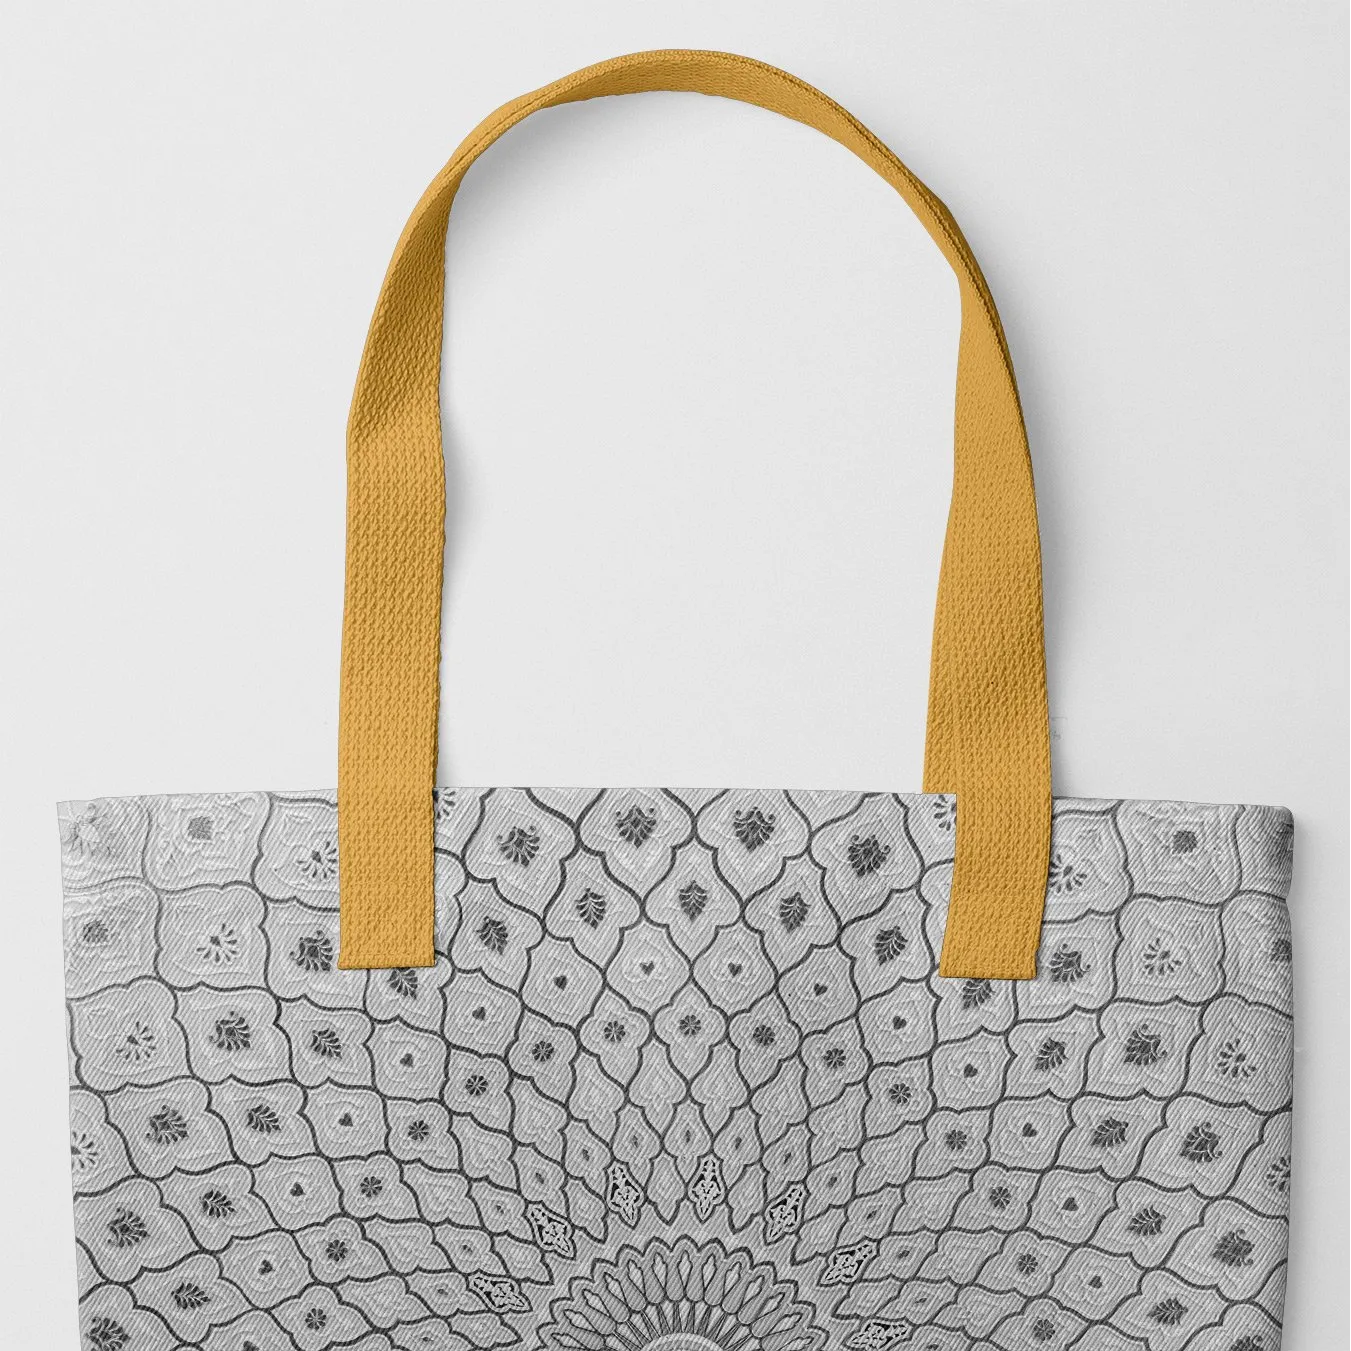 Divine Order Tote - Black And White - Heavy Duty Reusable Grocery Bag - Yellow Handles - Shopping Totes - Aesthetic Art